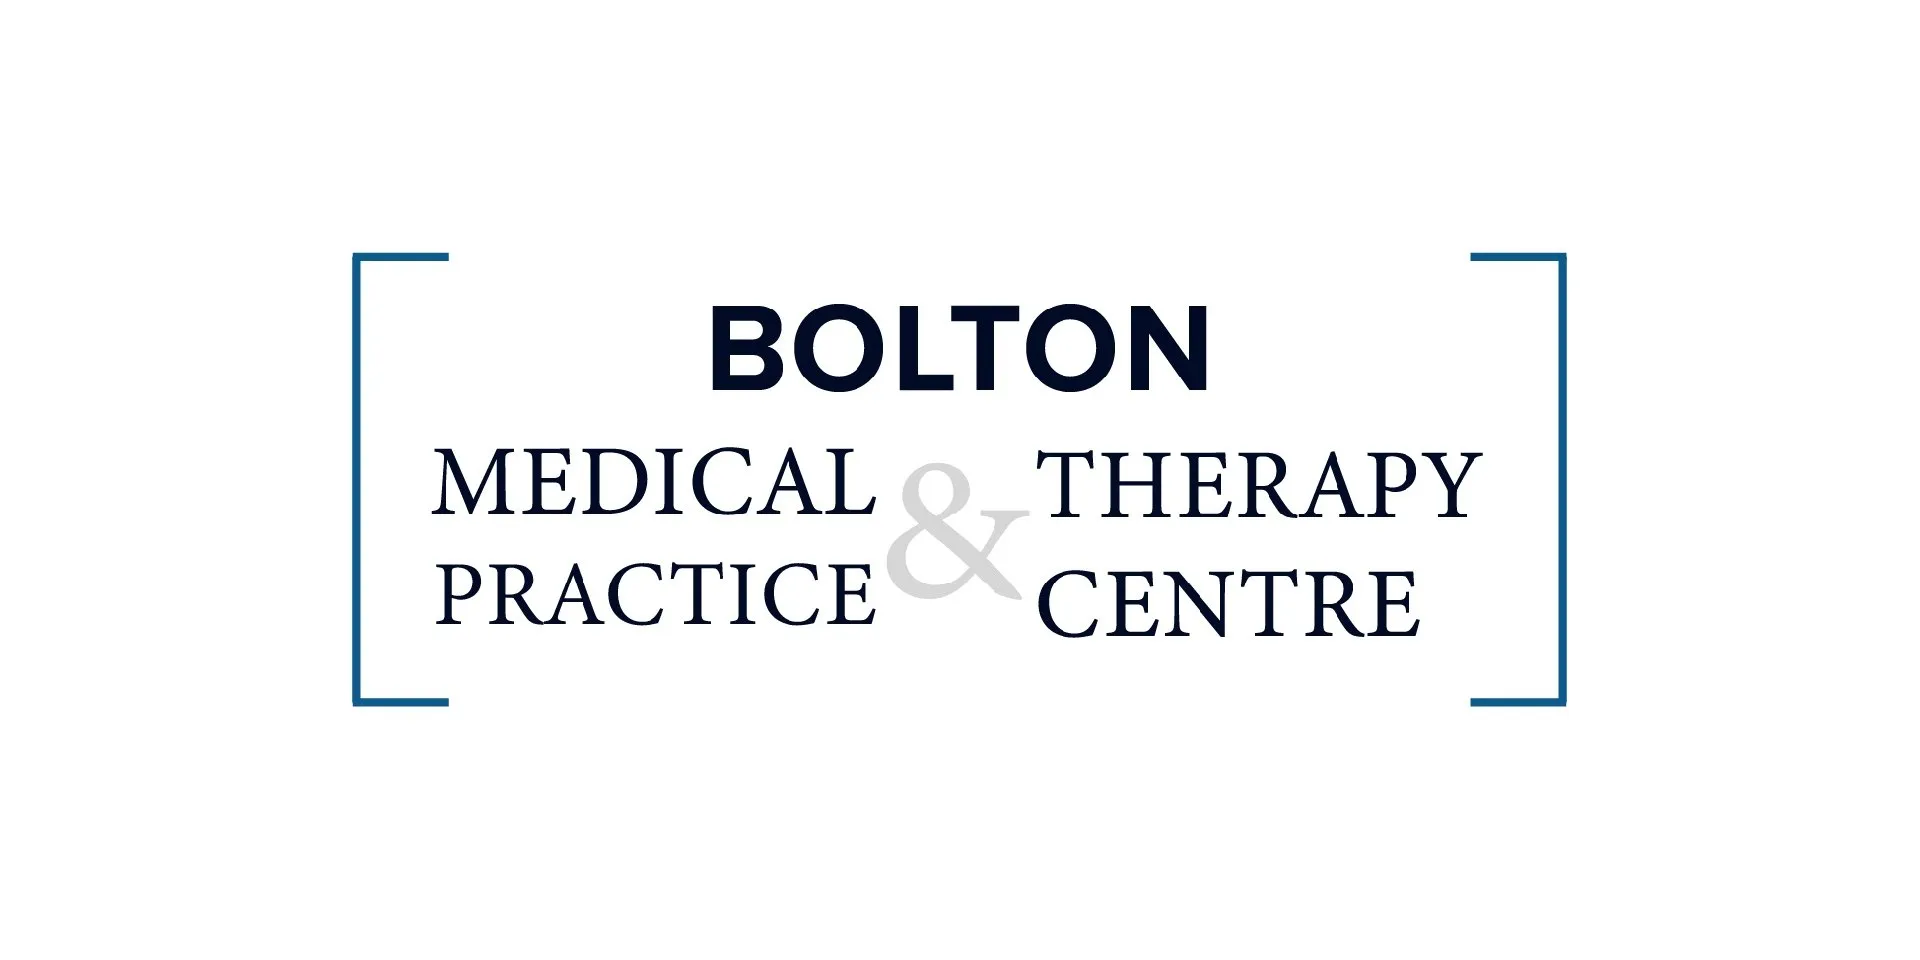 Bolton Medical Practice And Therapy Centre